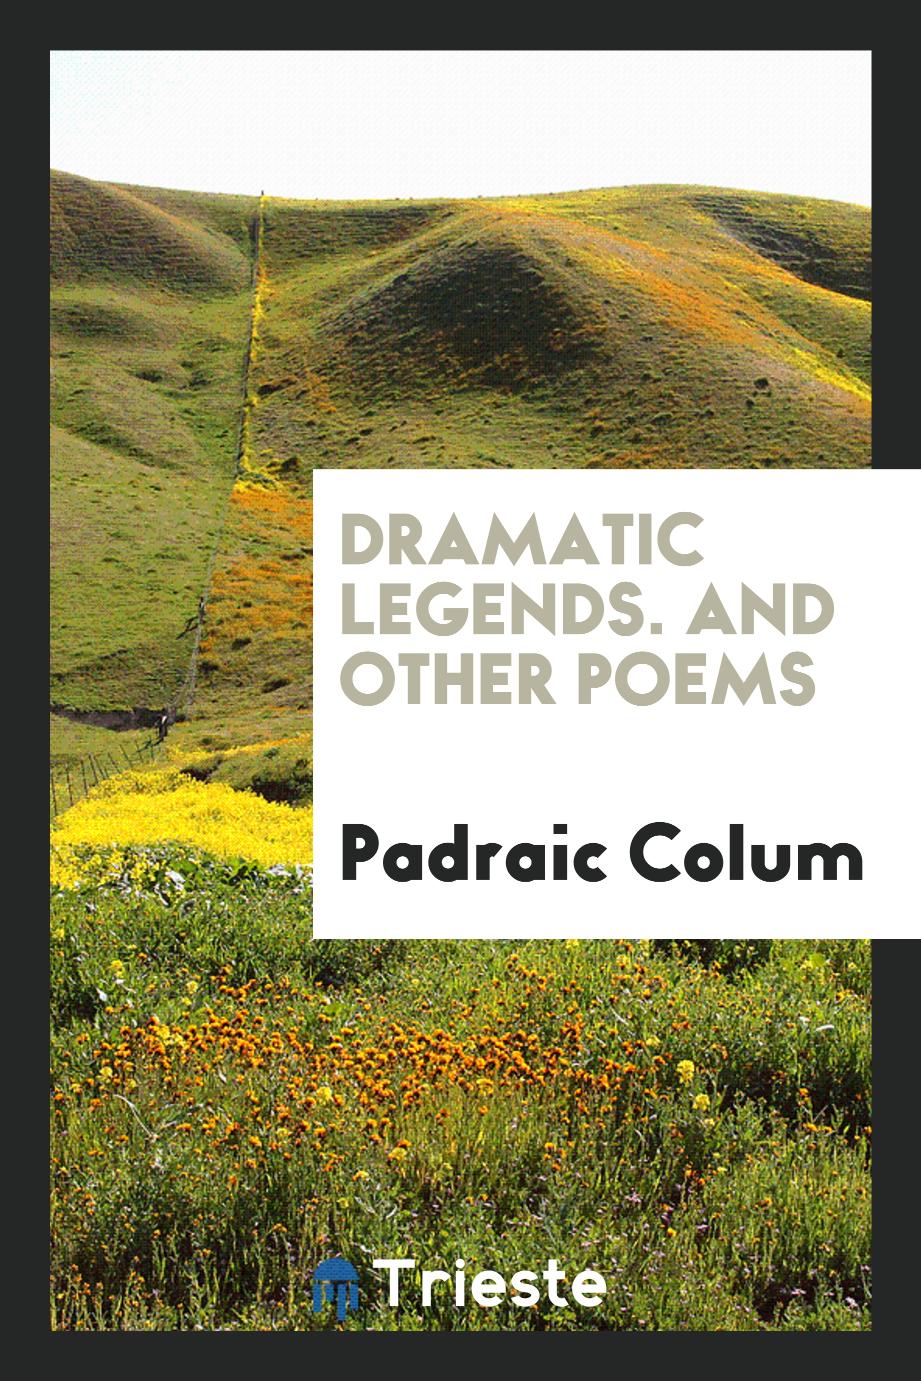 Dramatic Legends. And Other Poems